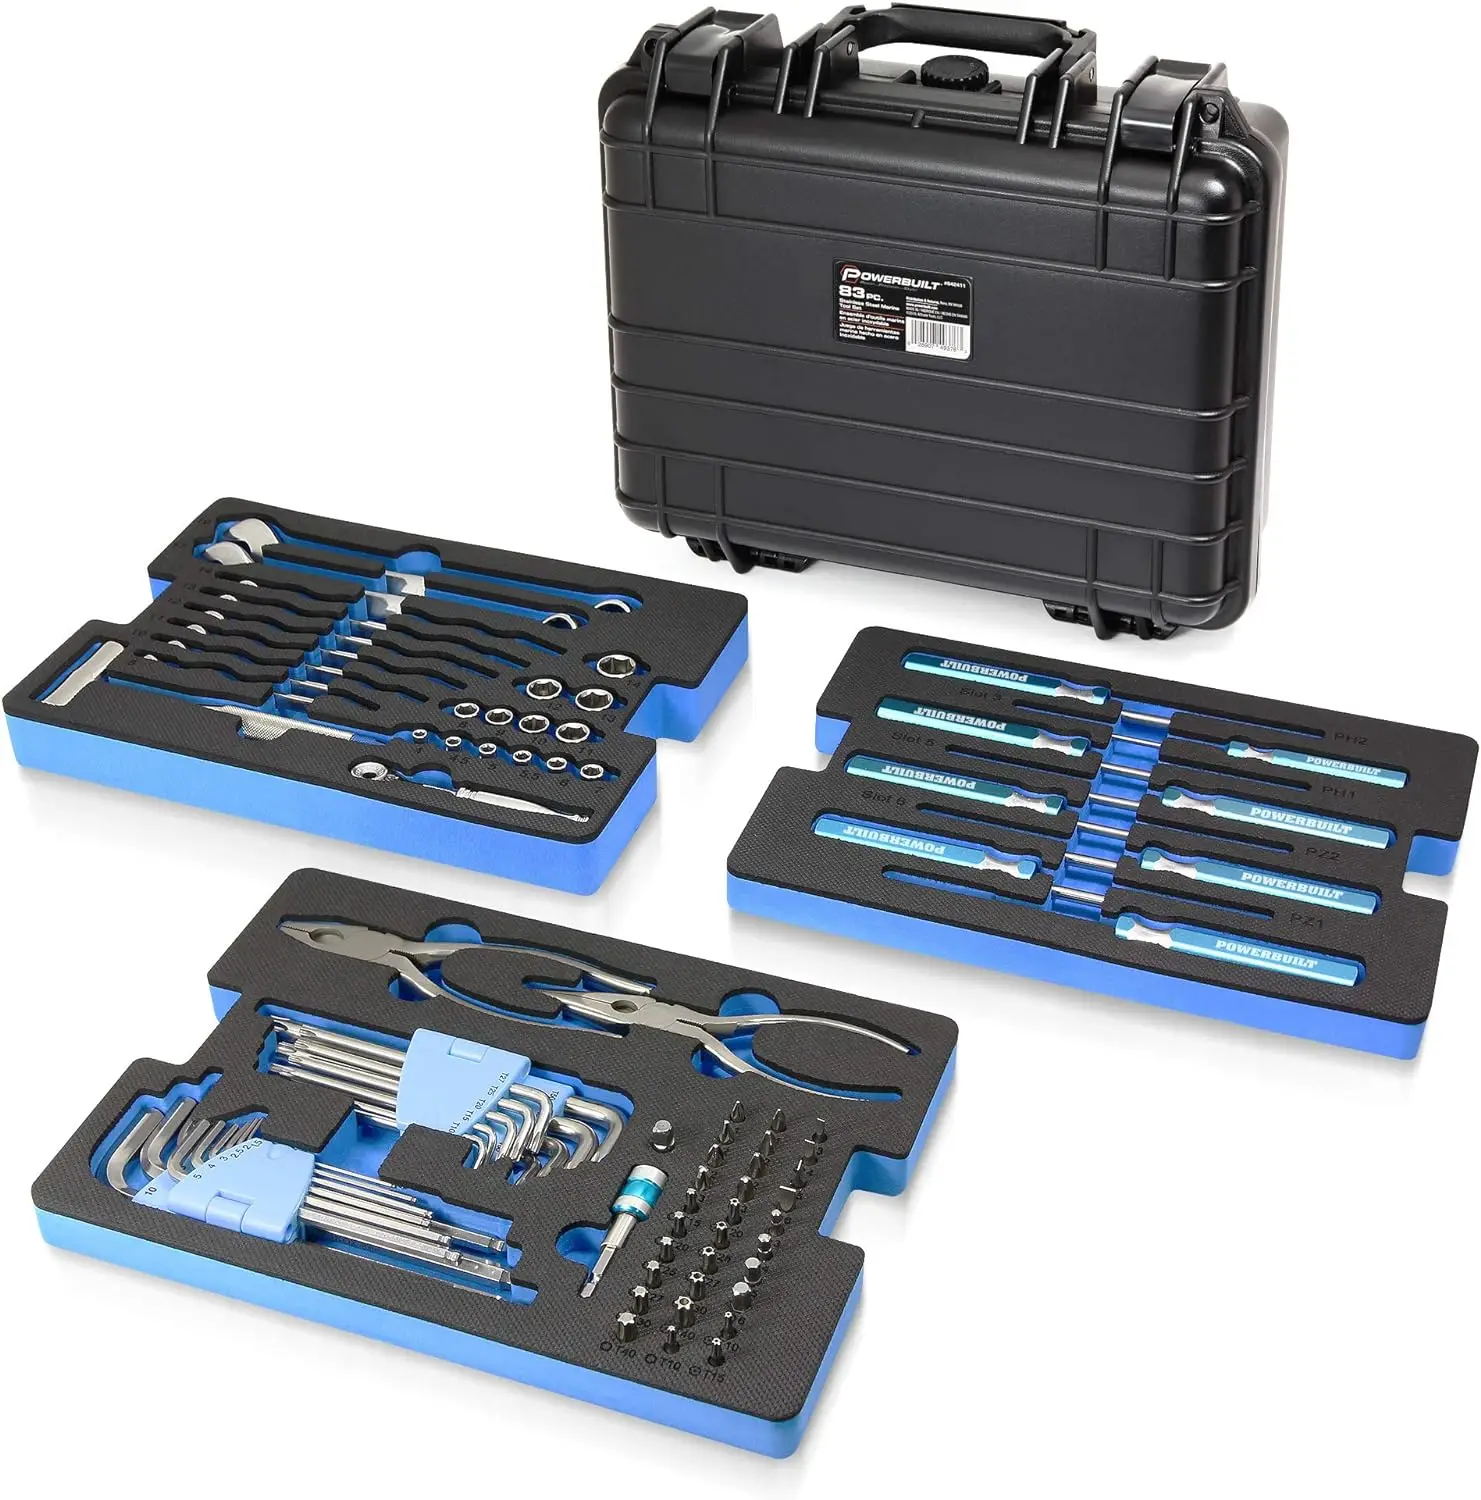 

Powerbuilt 83 Pc. 420J2 Stainless Steel Marine Boat Repair Tool Set, Drivers, Pliers, Wrenches, Mallet, Bit Driver/Bits, Sockets